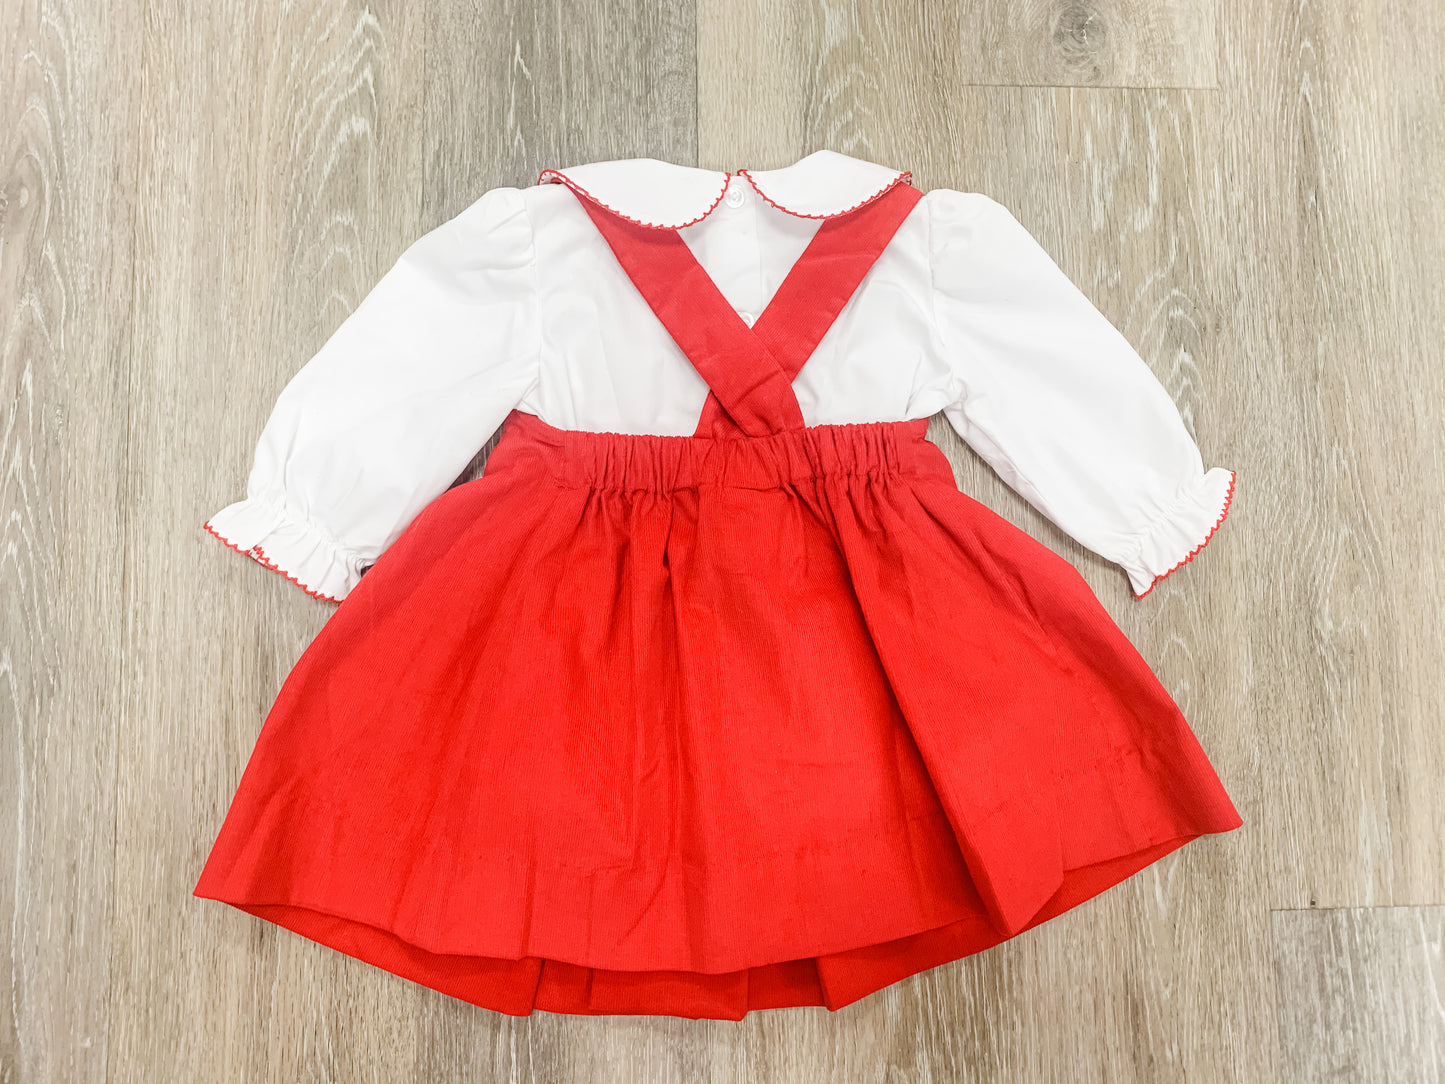 Red Cord Geo Dress with White Shirt  - Doodlebug's Children's Boutique